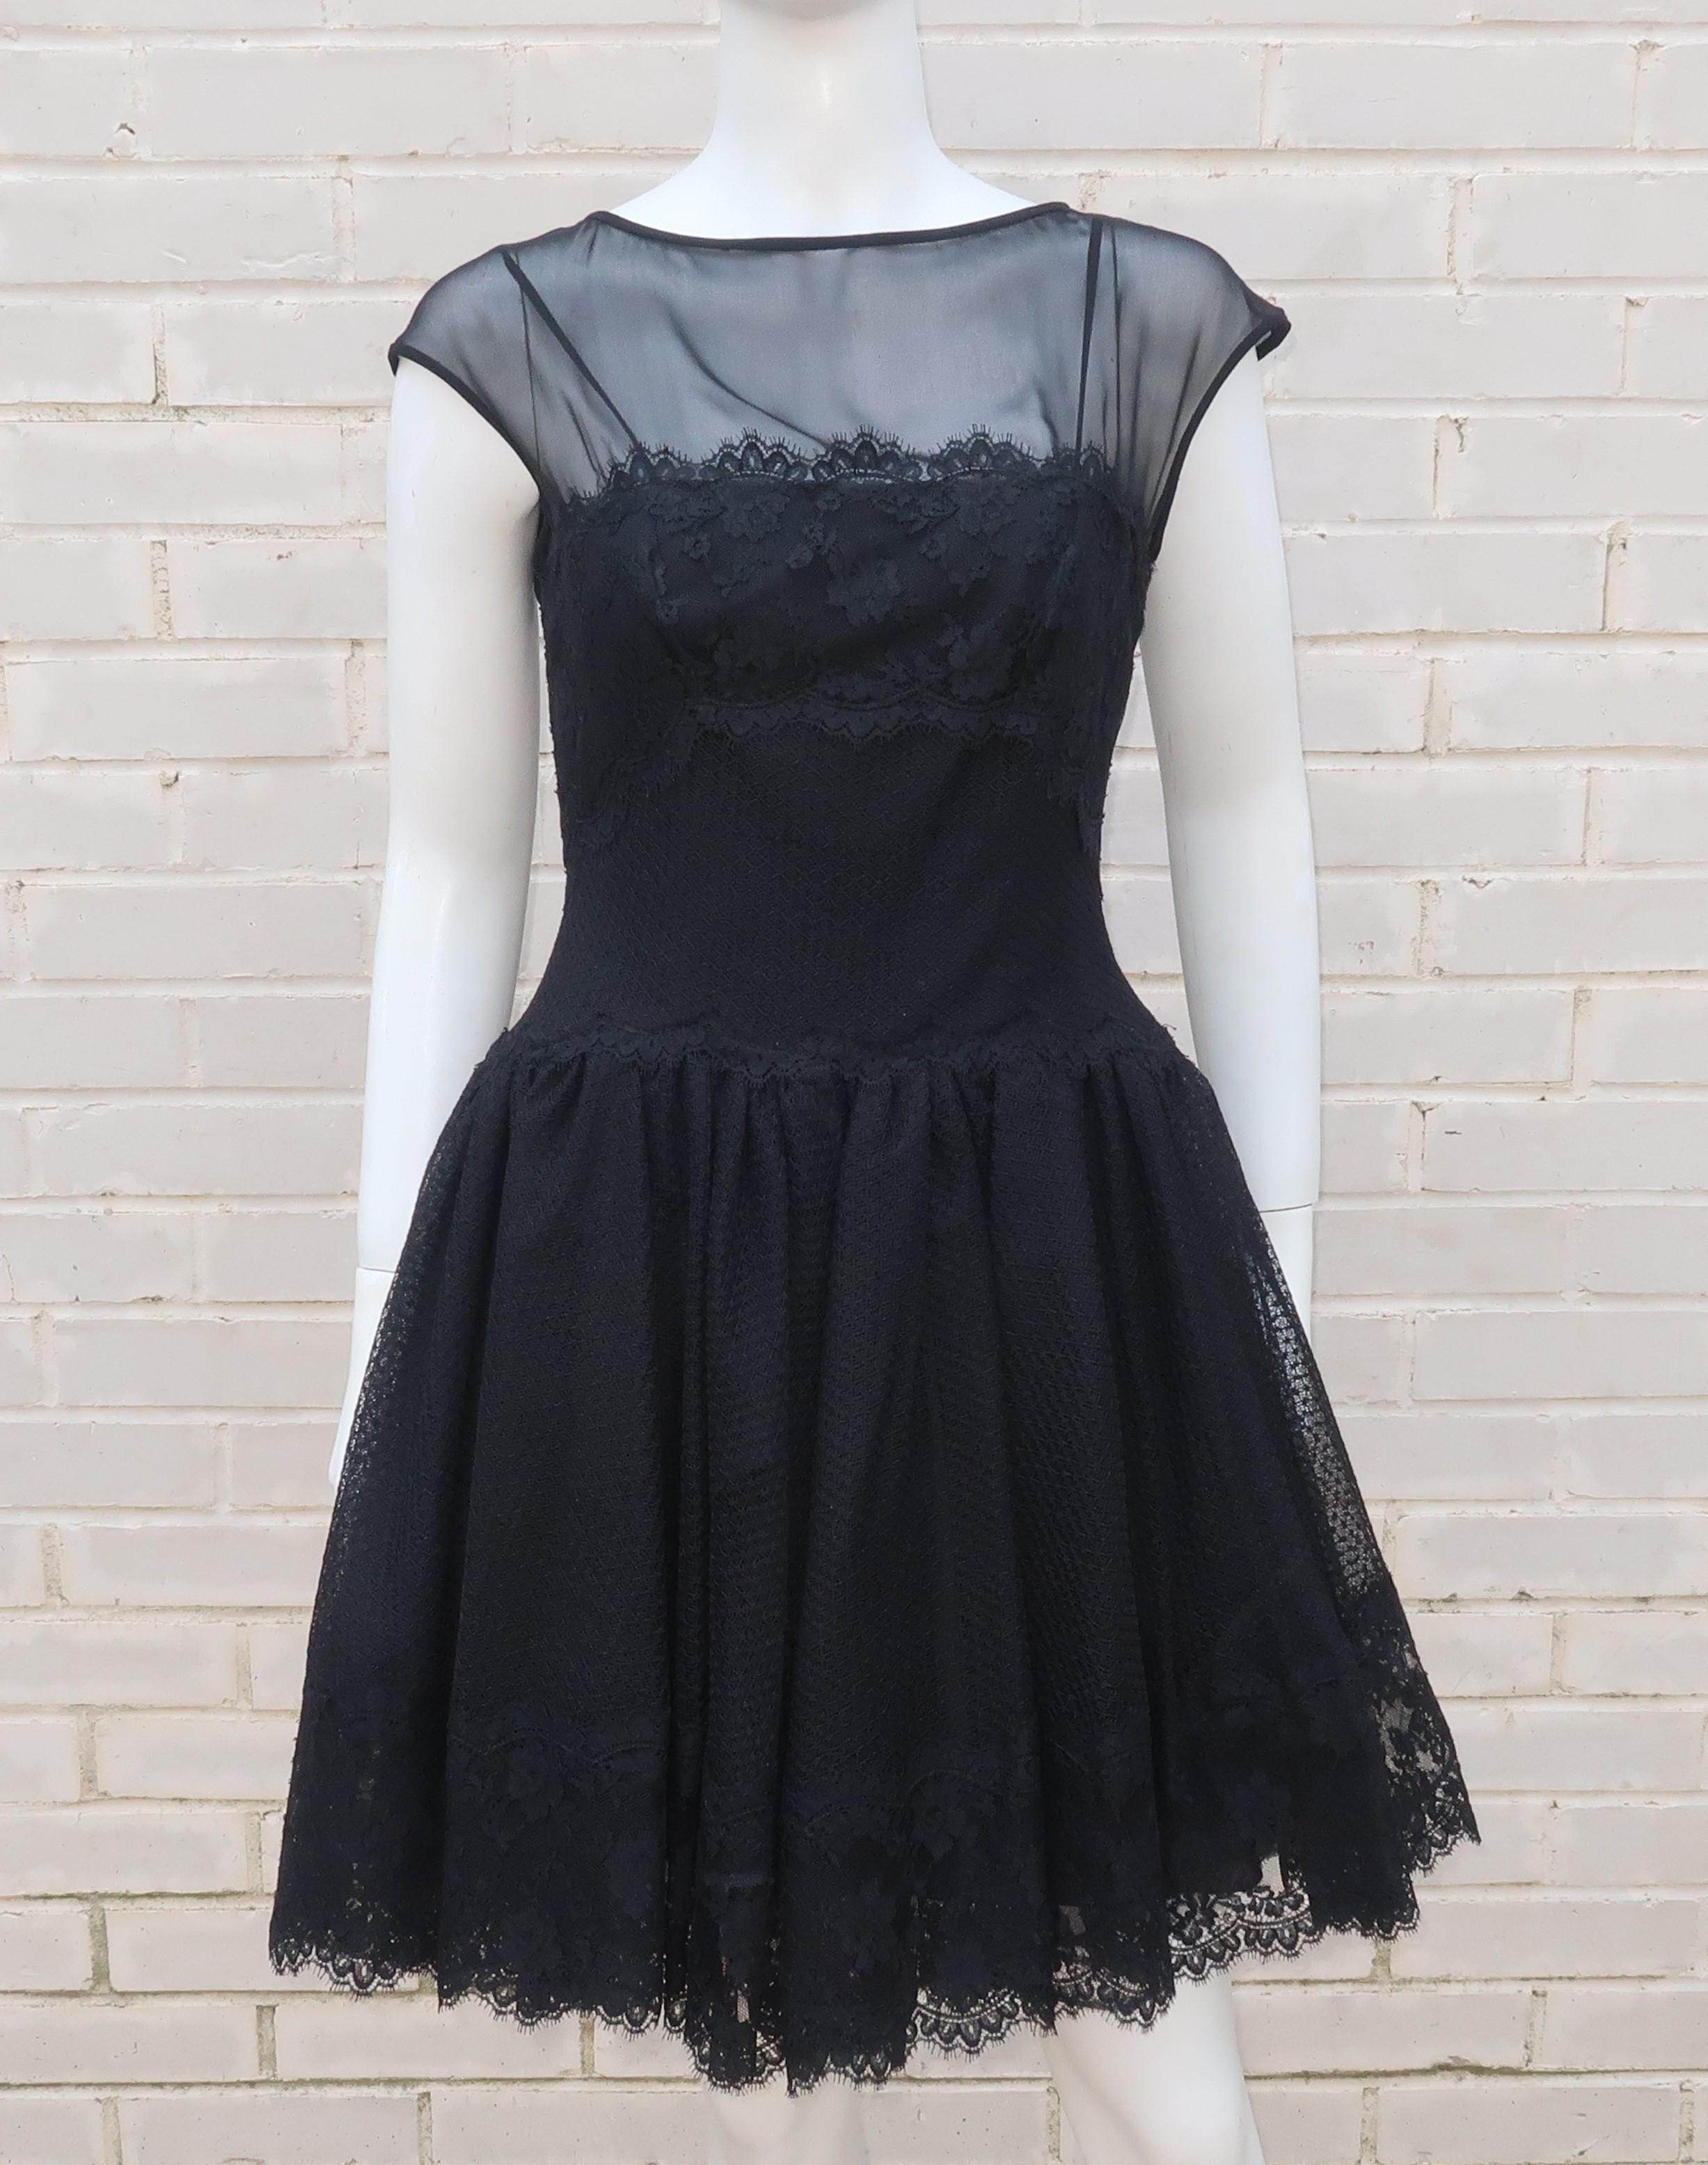 This 'little black dress' by Stanley Platos & Martin Ross has a youthful countenance with ballerina style details to give it something extra.  The flattering silhouette is fitted at the boning lined bodice that features a drop waist skirt